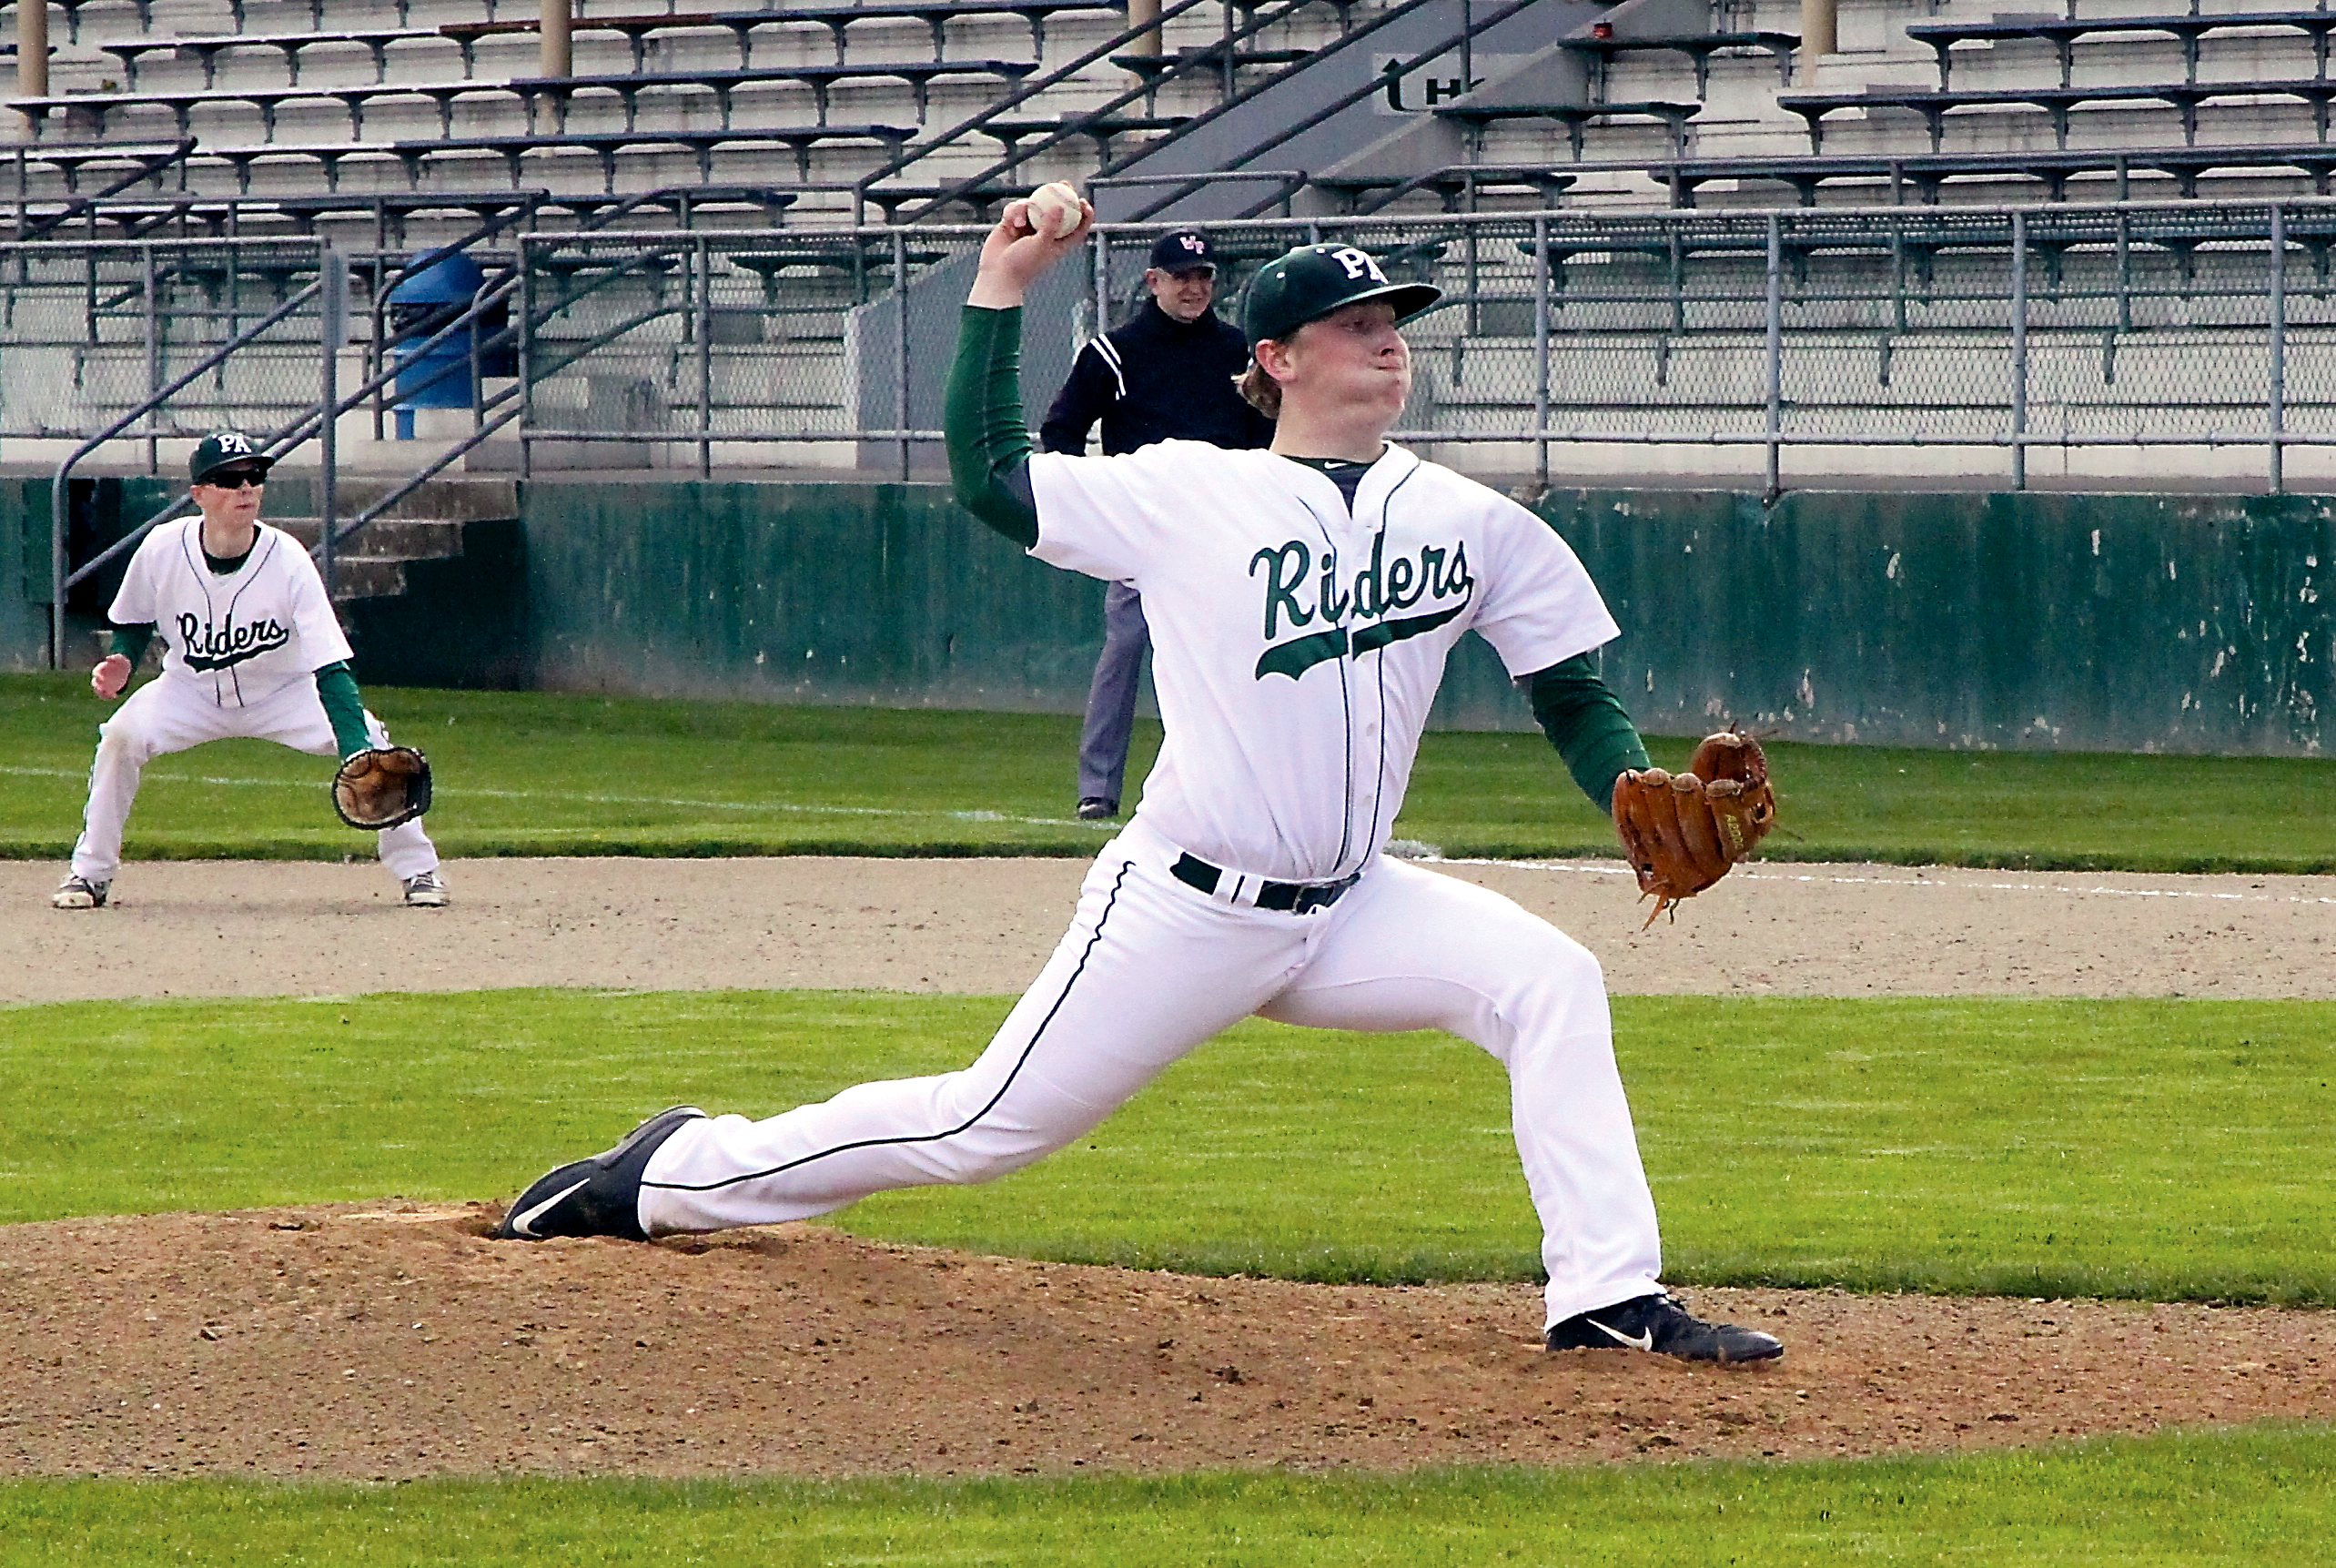 Port Angeles' Travis Paynter prepares to throw a pitch during the Roughriders' 4-2 over Sequim at Civic Field. Paynter pitched a complete-game 4-hitter